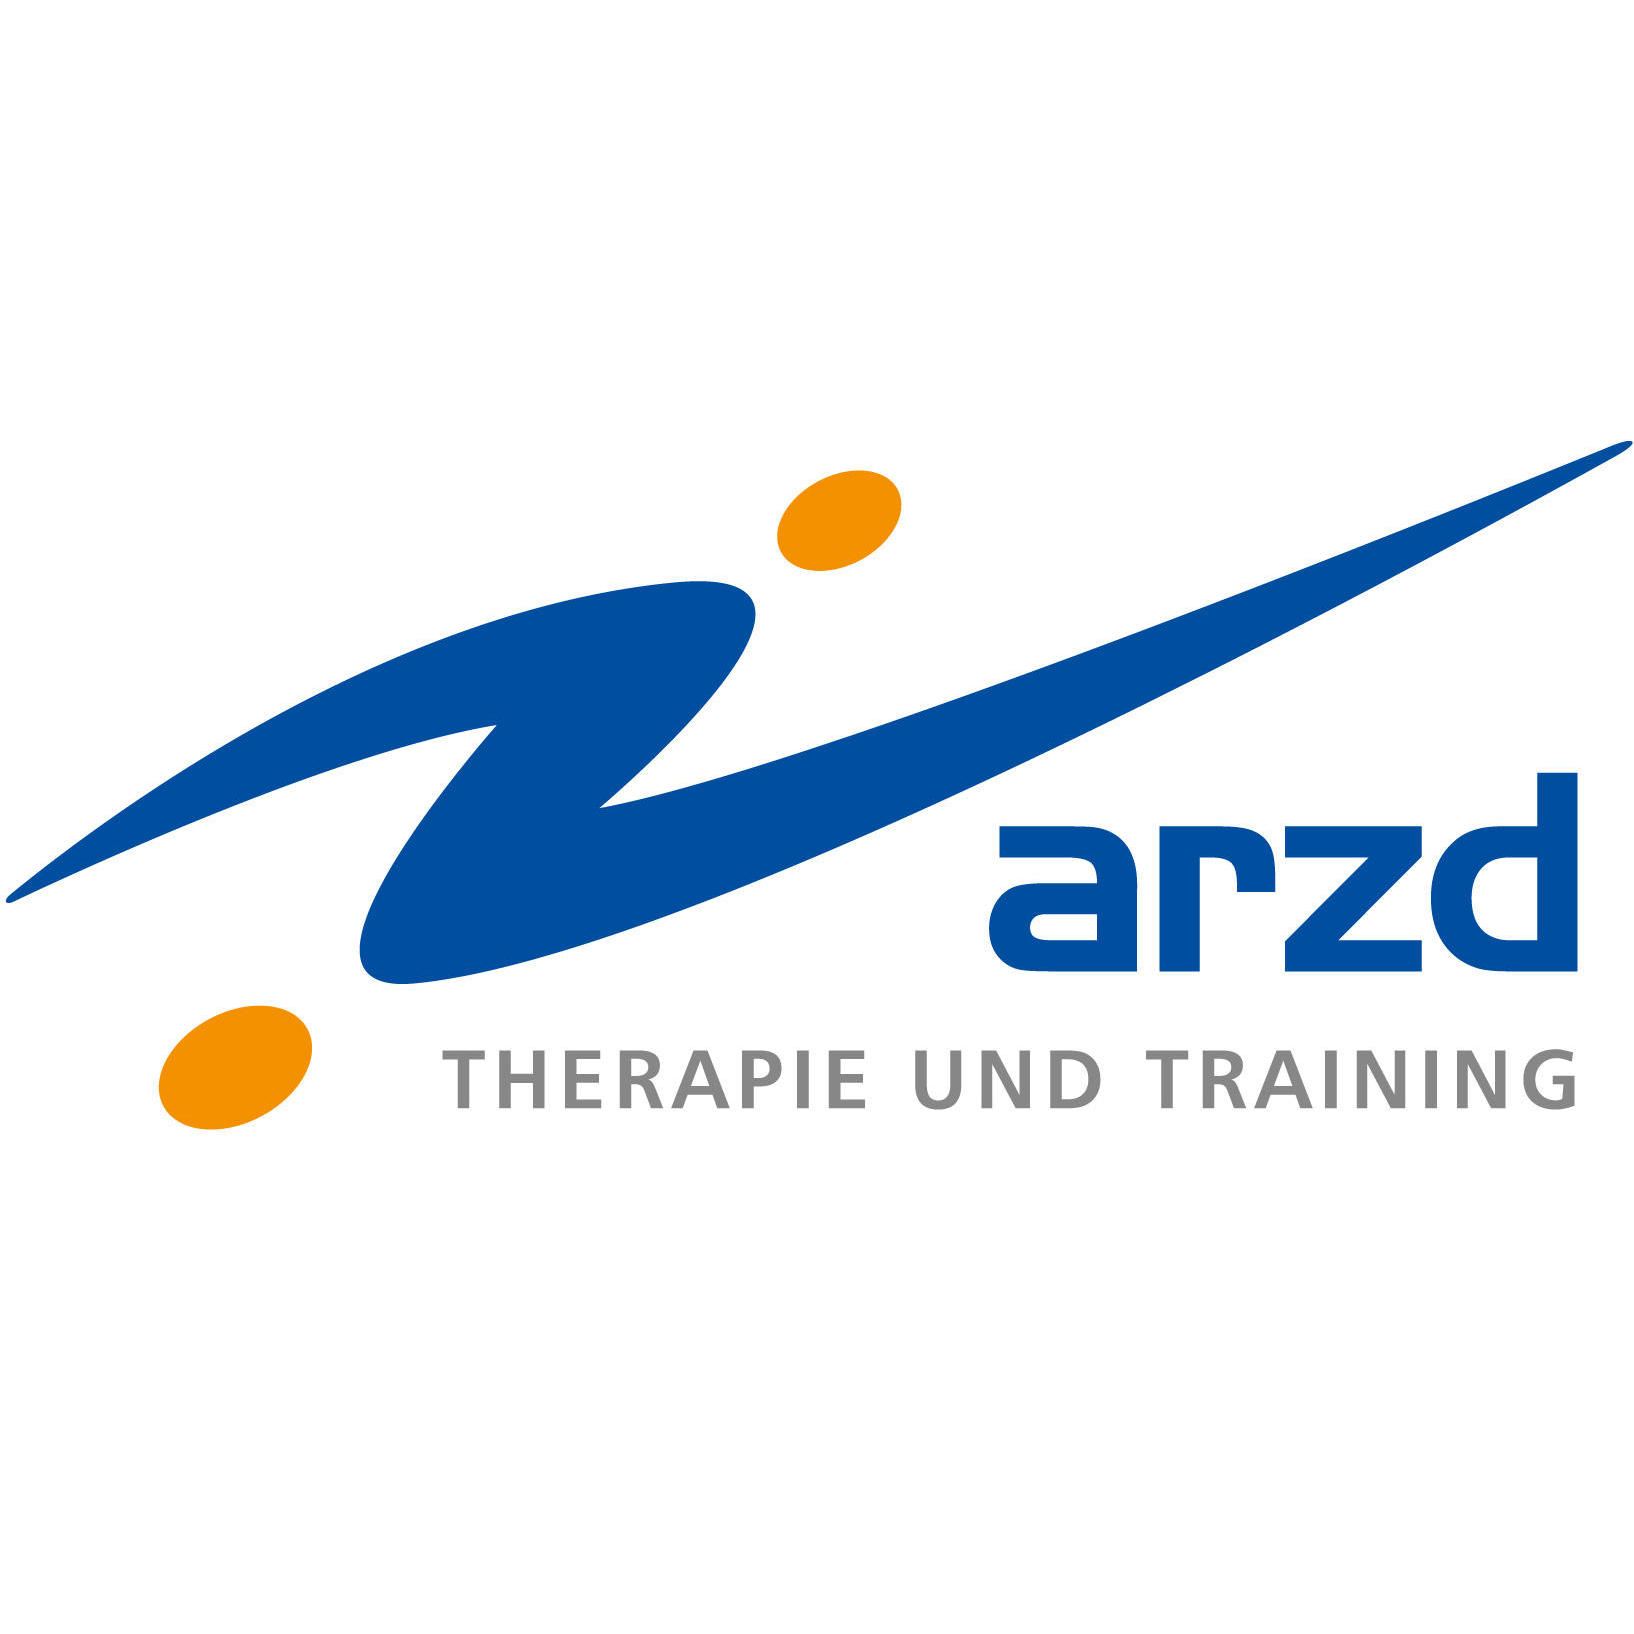 arzd Therapie und Training  Heininger & Kalinowski GbR - Physical Therapy Clinic - Duisburg - 0203 26460 Germany | ShowMeLocal.com